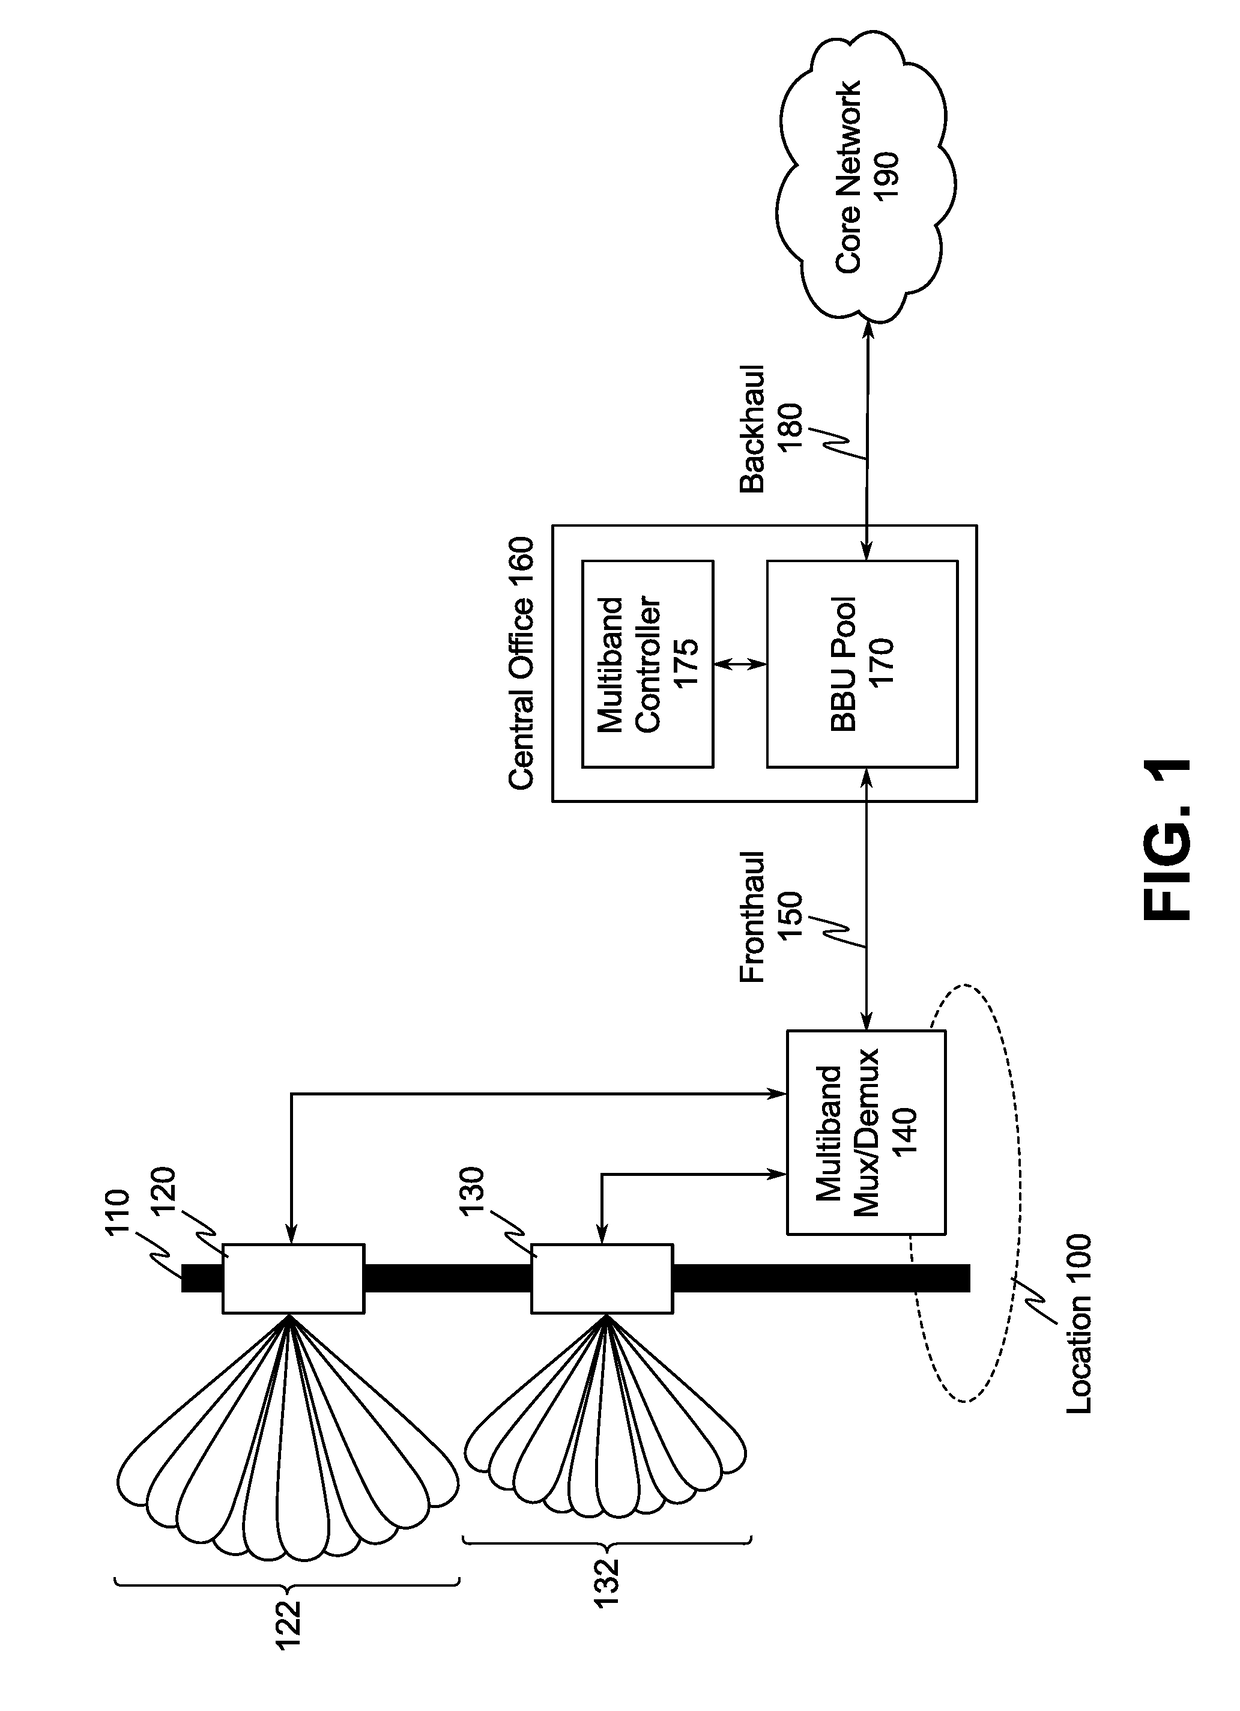 Band assignment for user equipment on multiband advanced wireless communications networks